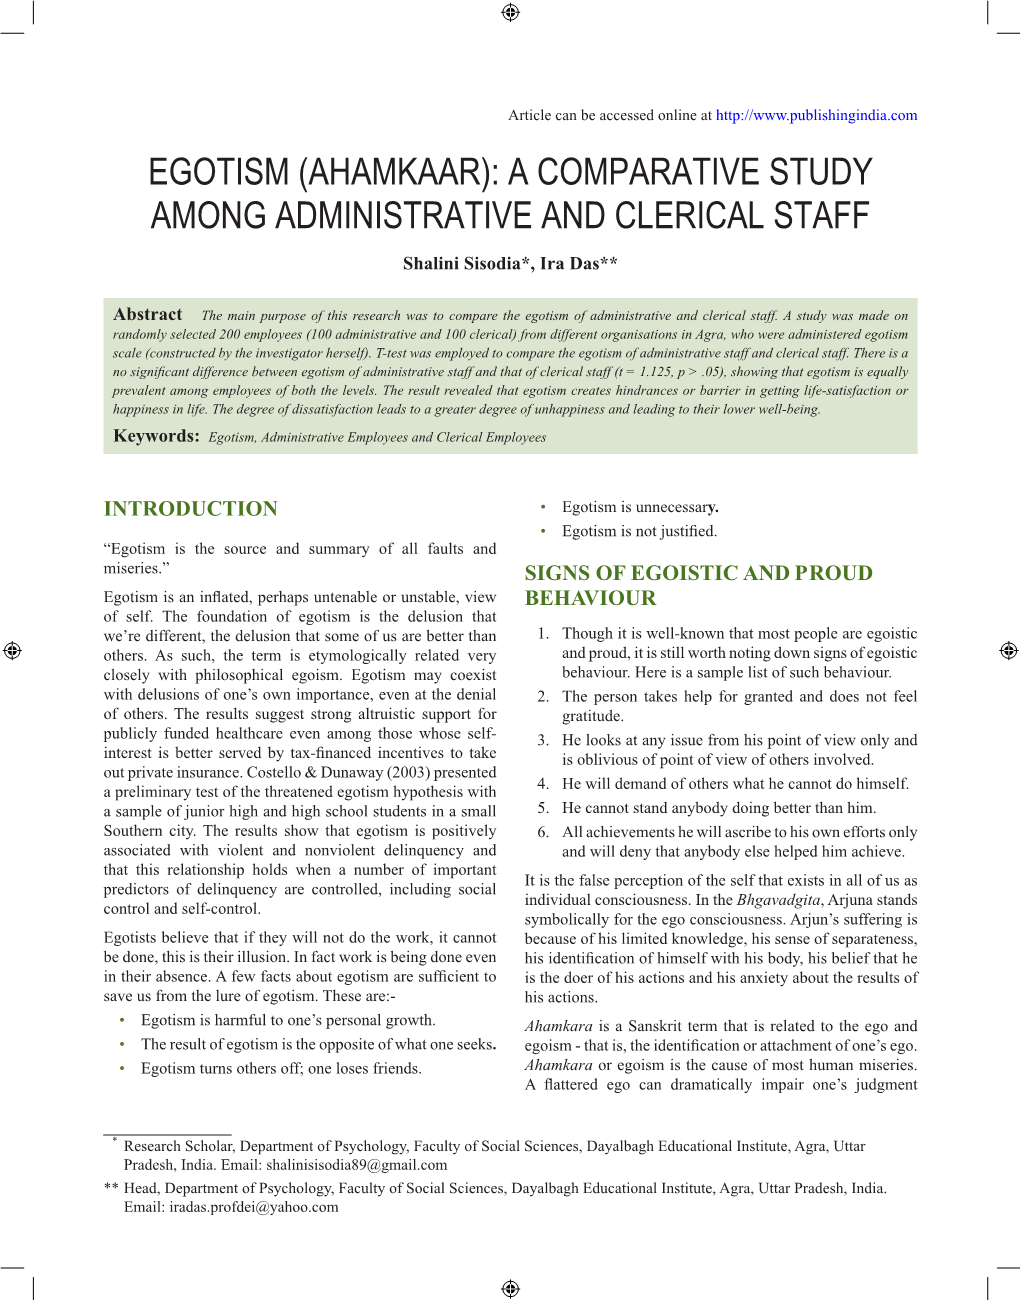 Egotism (Ahamkaar): a Comparative Study Among Administrative and Clerical Staff